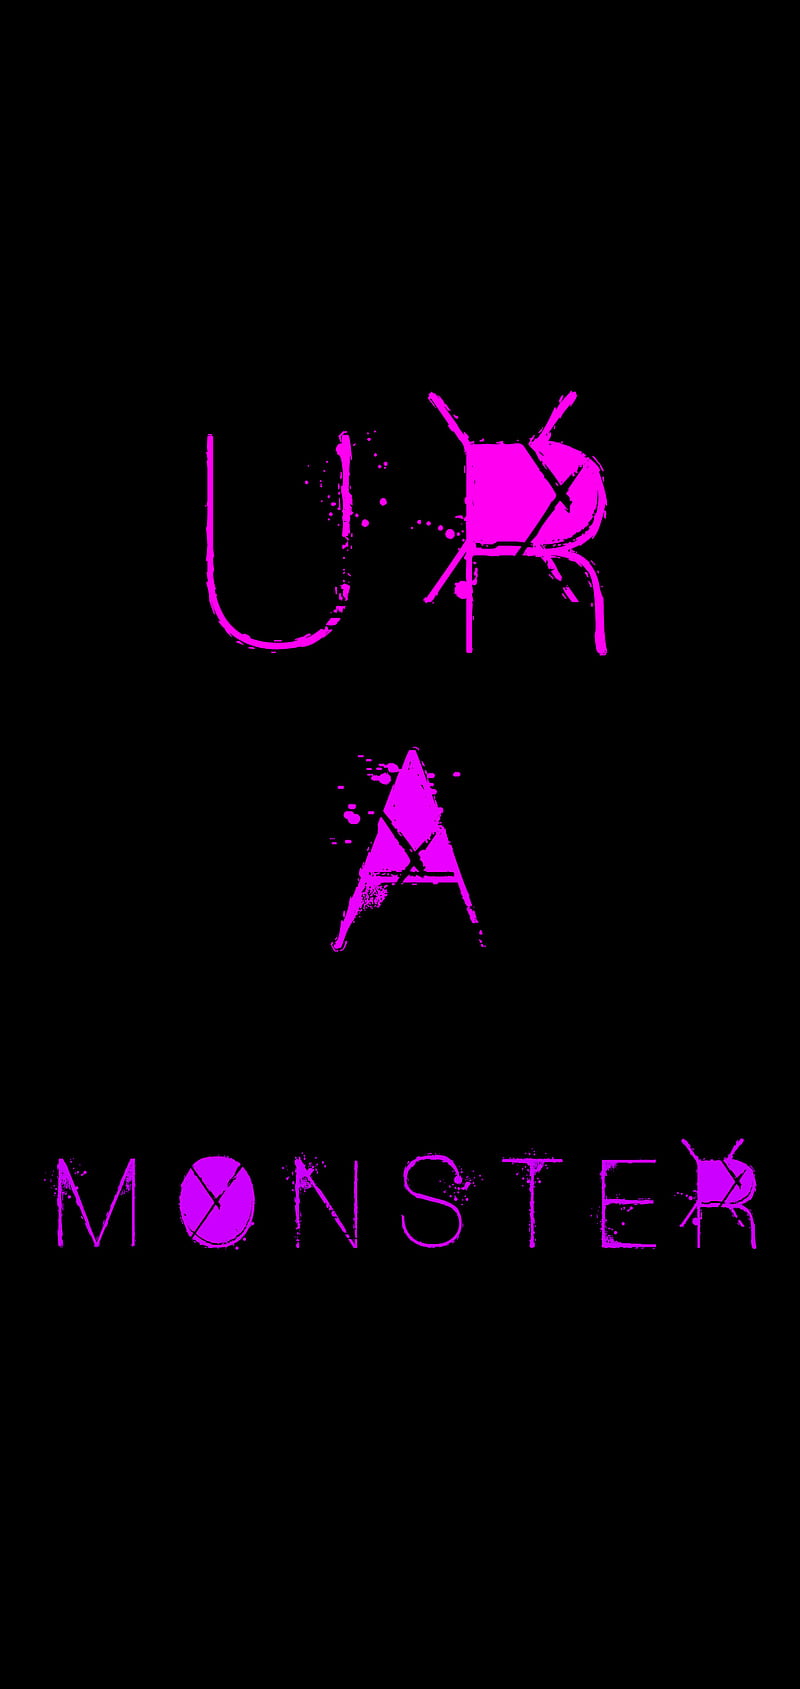 UR A MONSTER V1, a monster, android, emo, goth, iphone, ur a monster, you, HD phone wallpaper